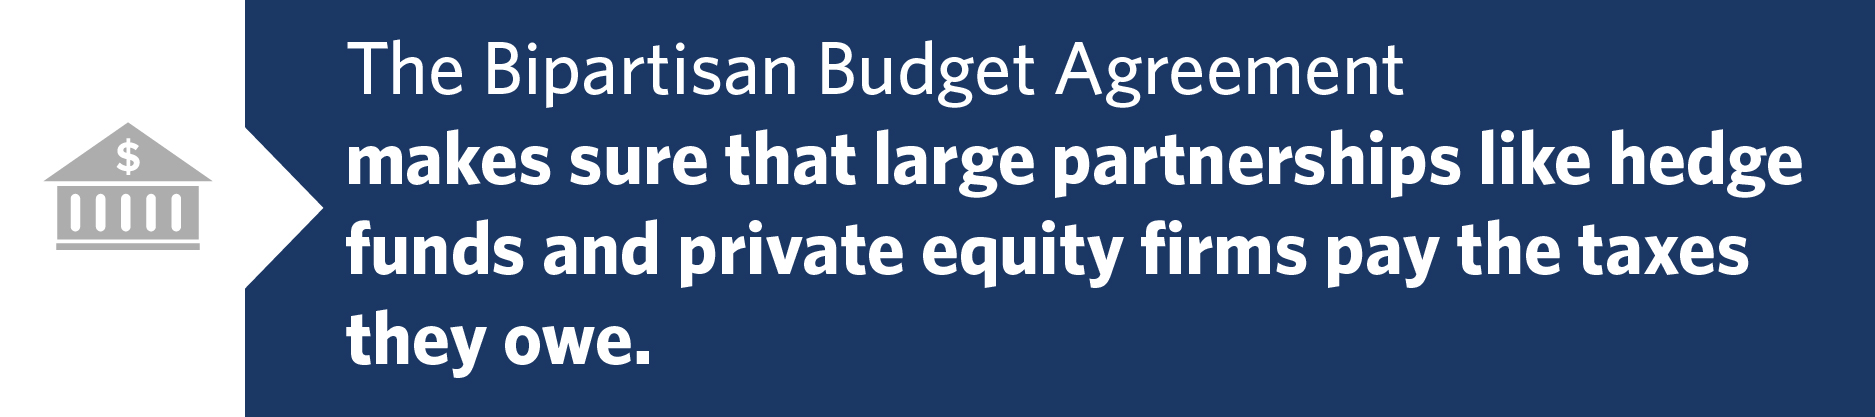 Bipartisan Budget Agreement Hedge Funds Pay Taxes